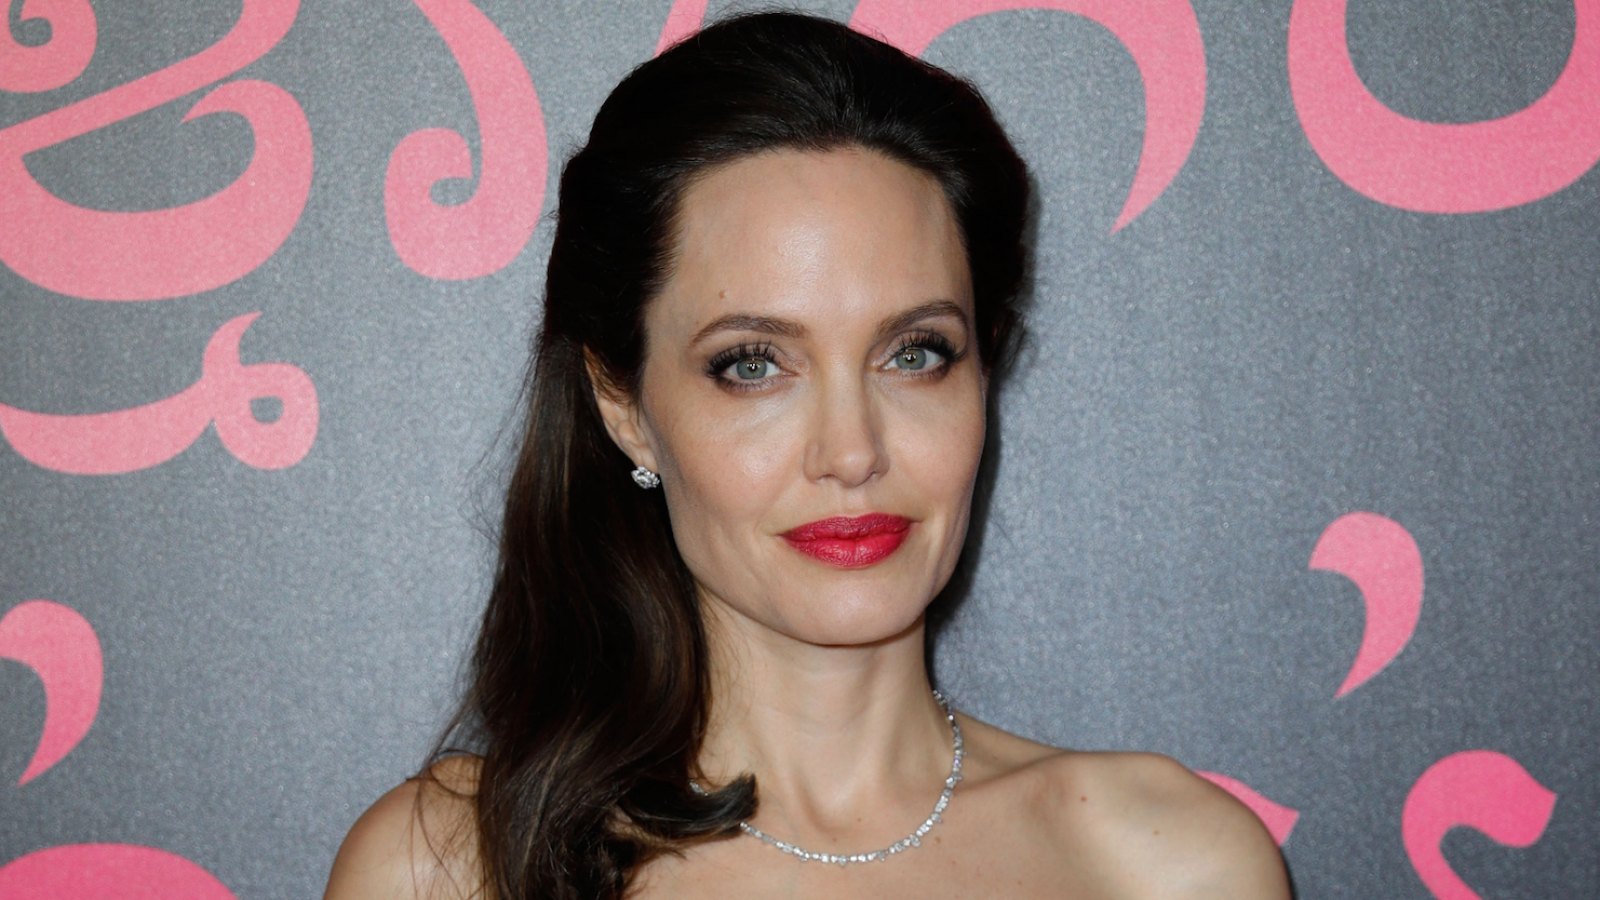 MAY 17th 2023: Actress and activist Angelina Jolie announces the